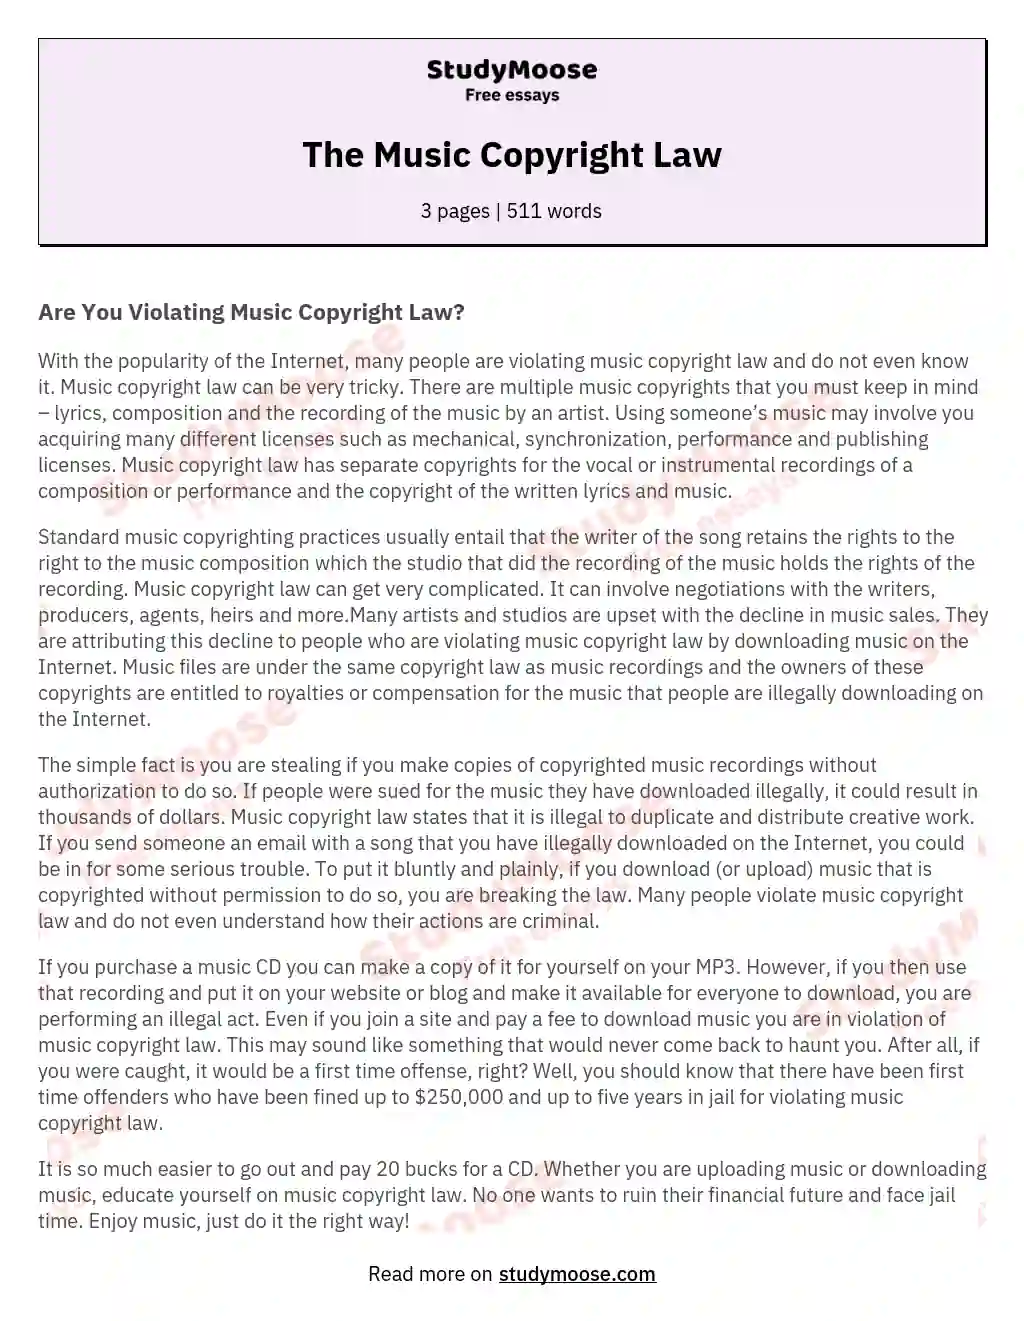 The Music Copyright Law